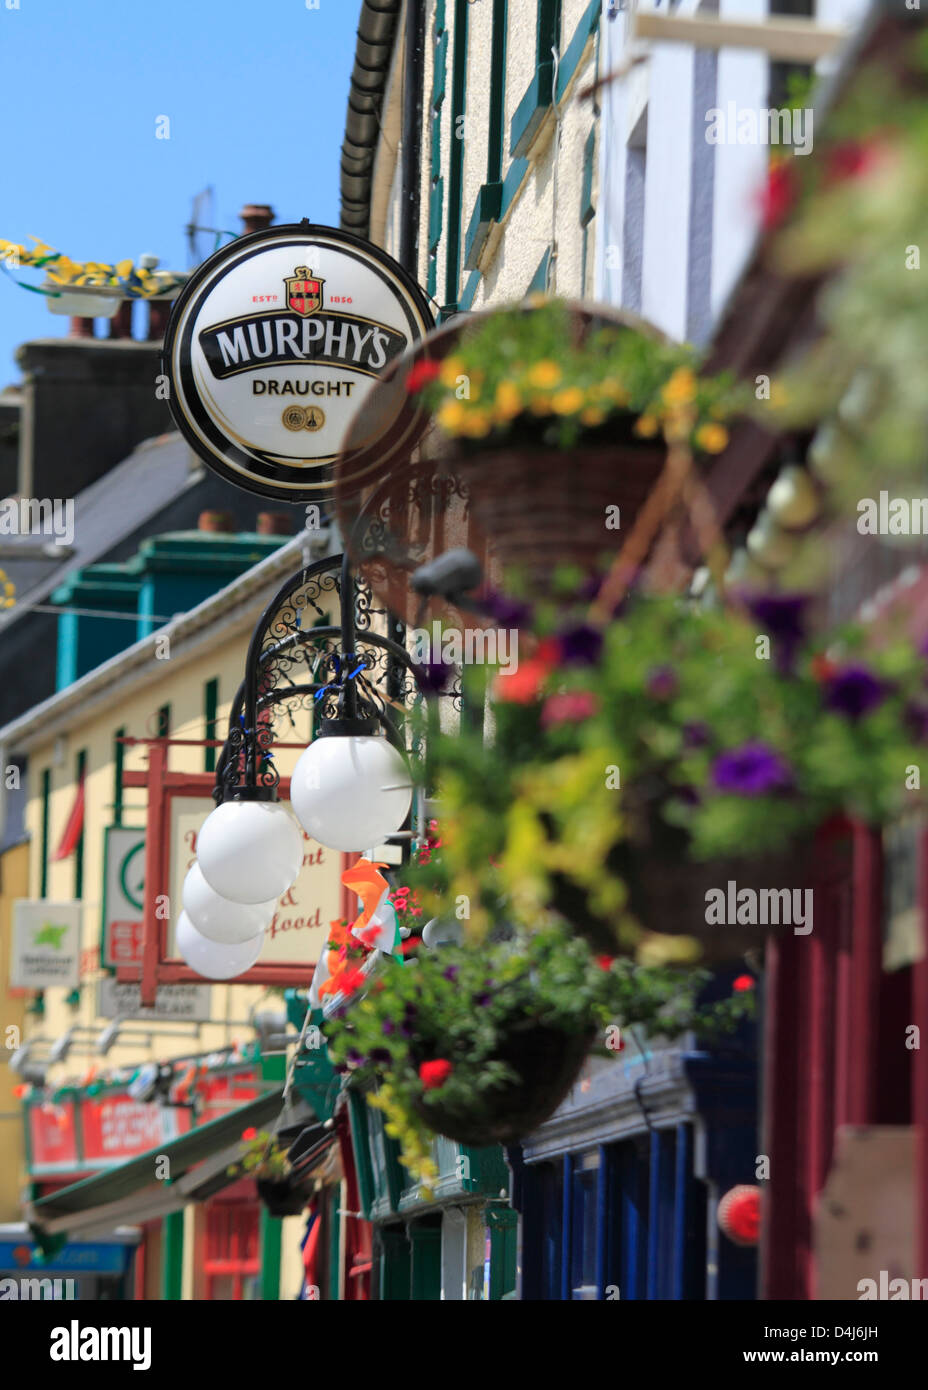 Traditional Irish Shop fronts and pub Murphys Irish Stout signs in the village of Schull, West County cork, Republic of Ireland Stock Photo